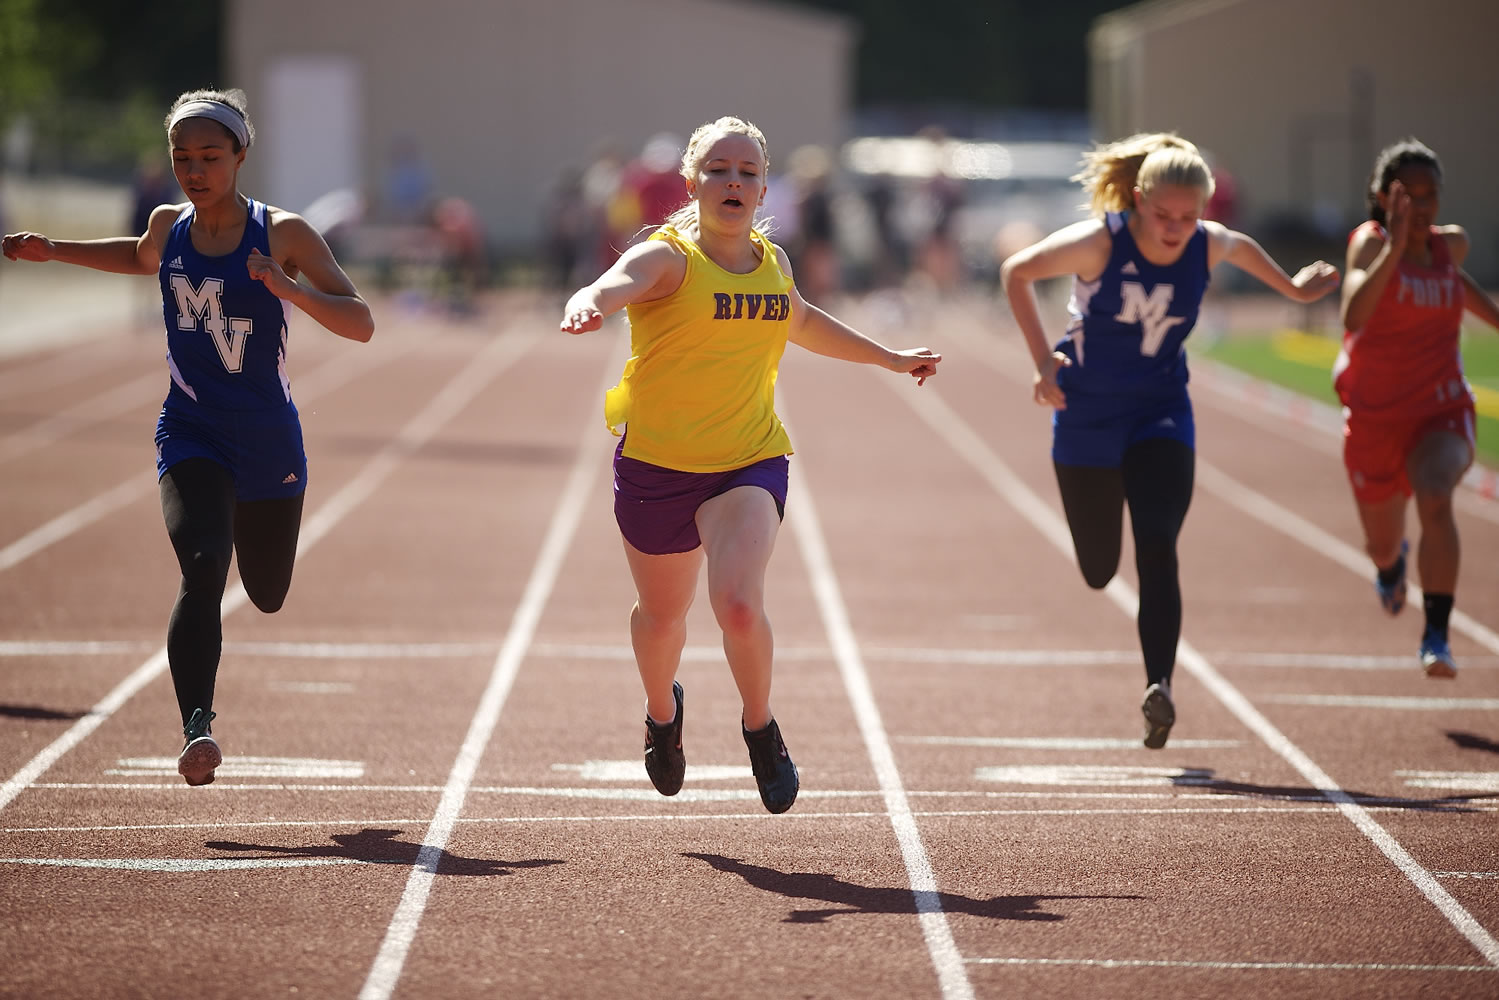 Emily Morgan of Columbia River has been battling a foot injury for a month, but it flared up after last week's district meet and put her on crutches.